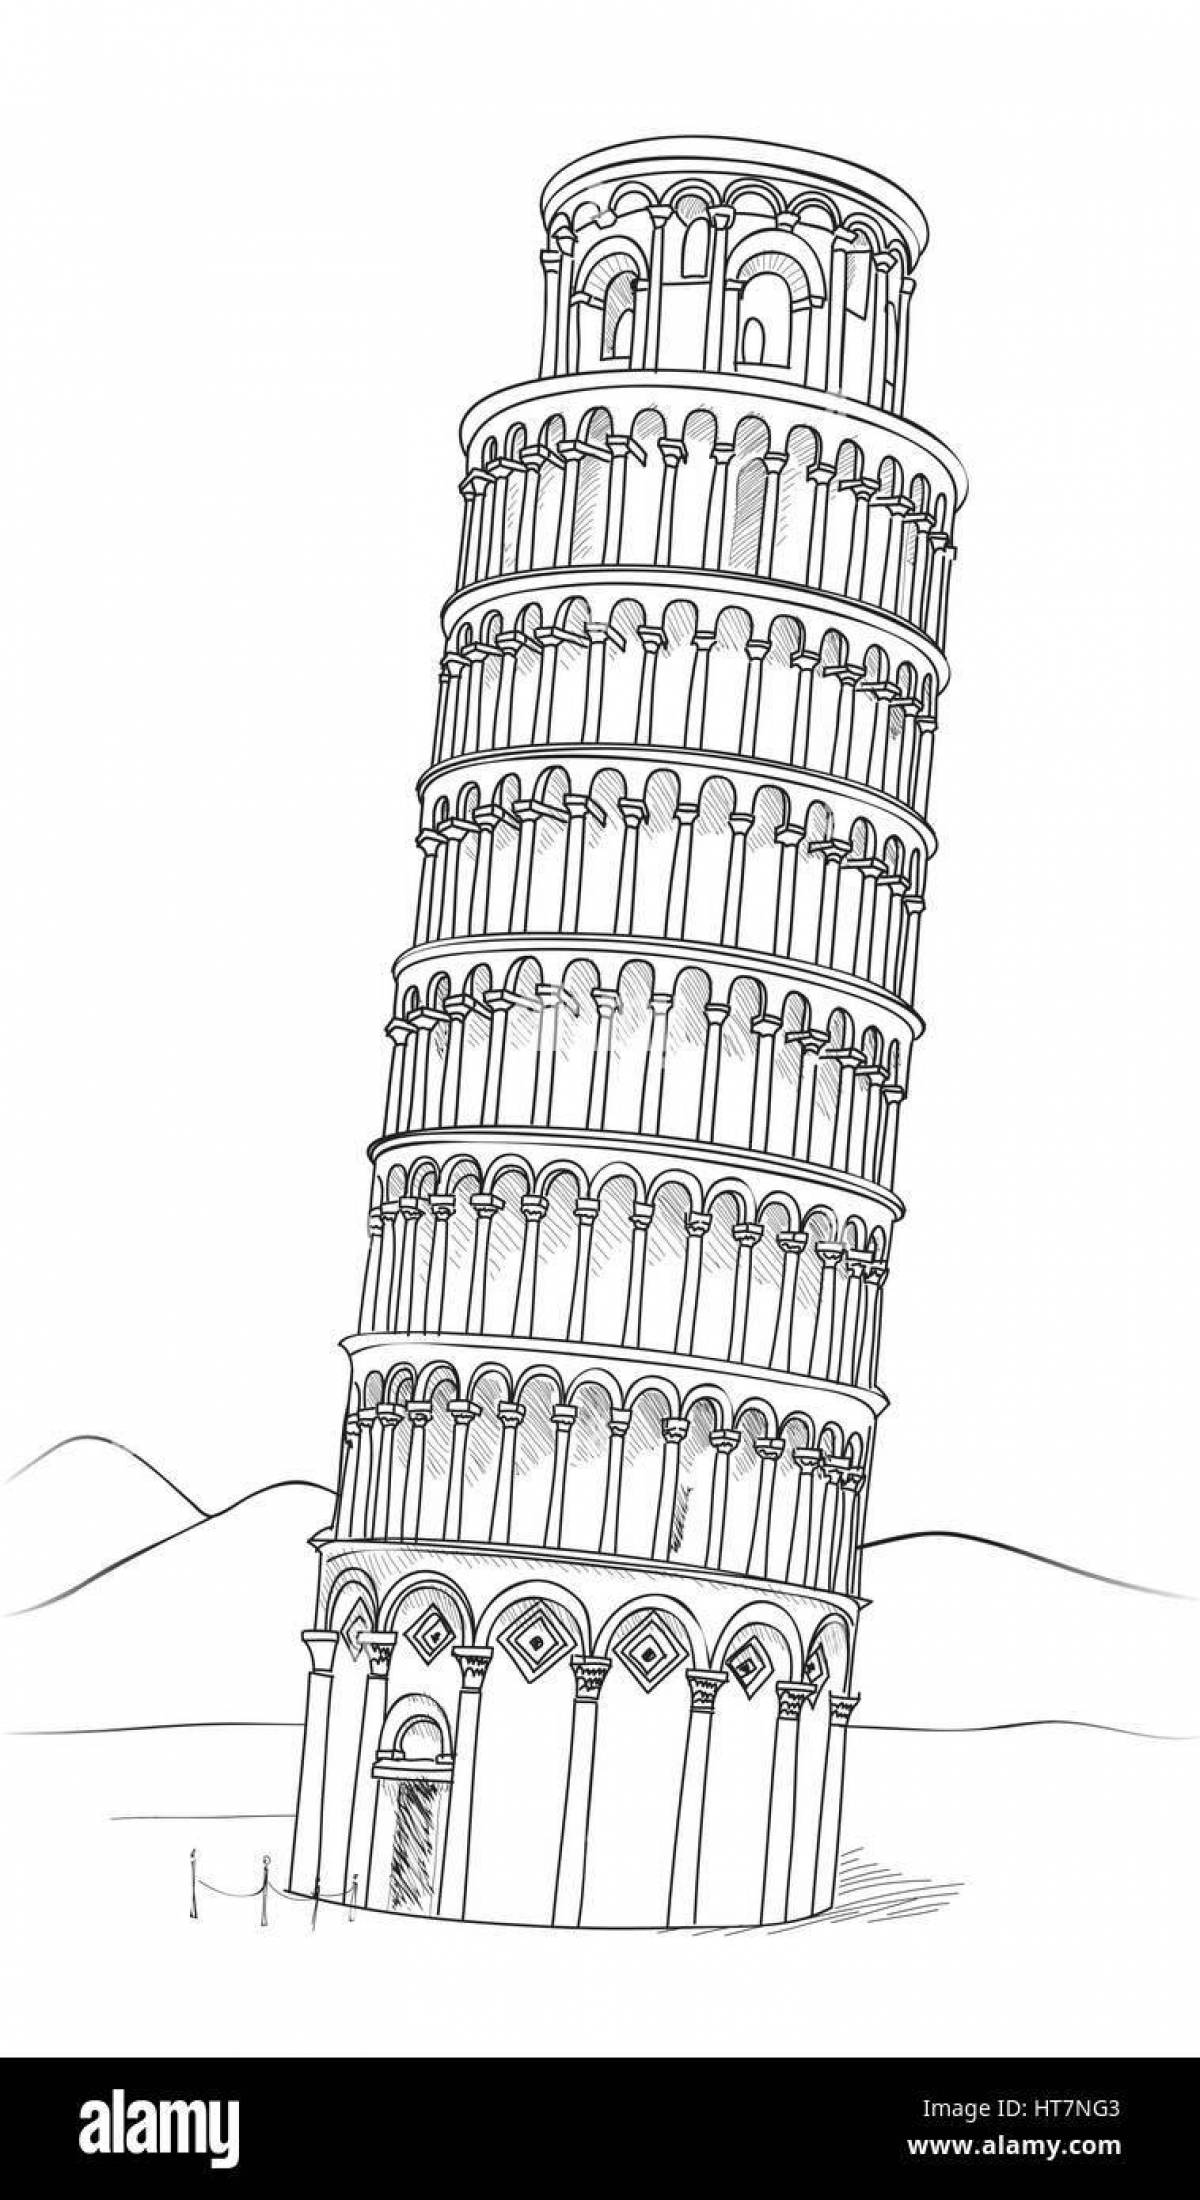 Unique Leaning Tower of Pisa skin